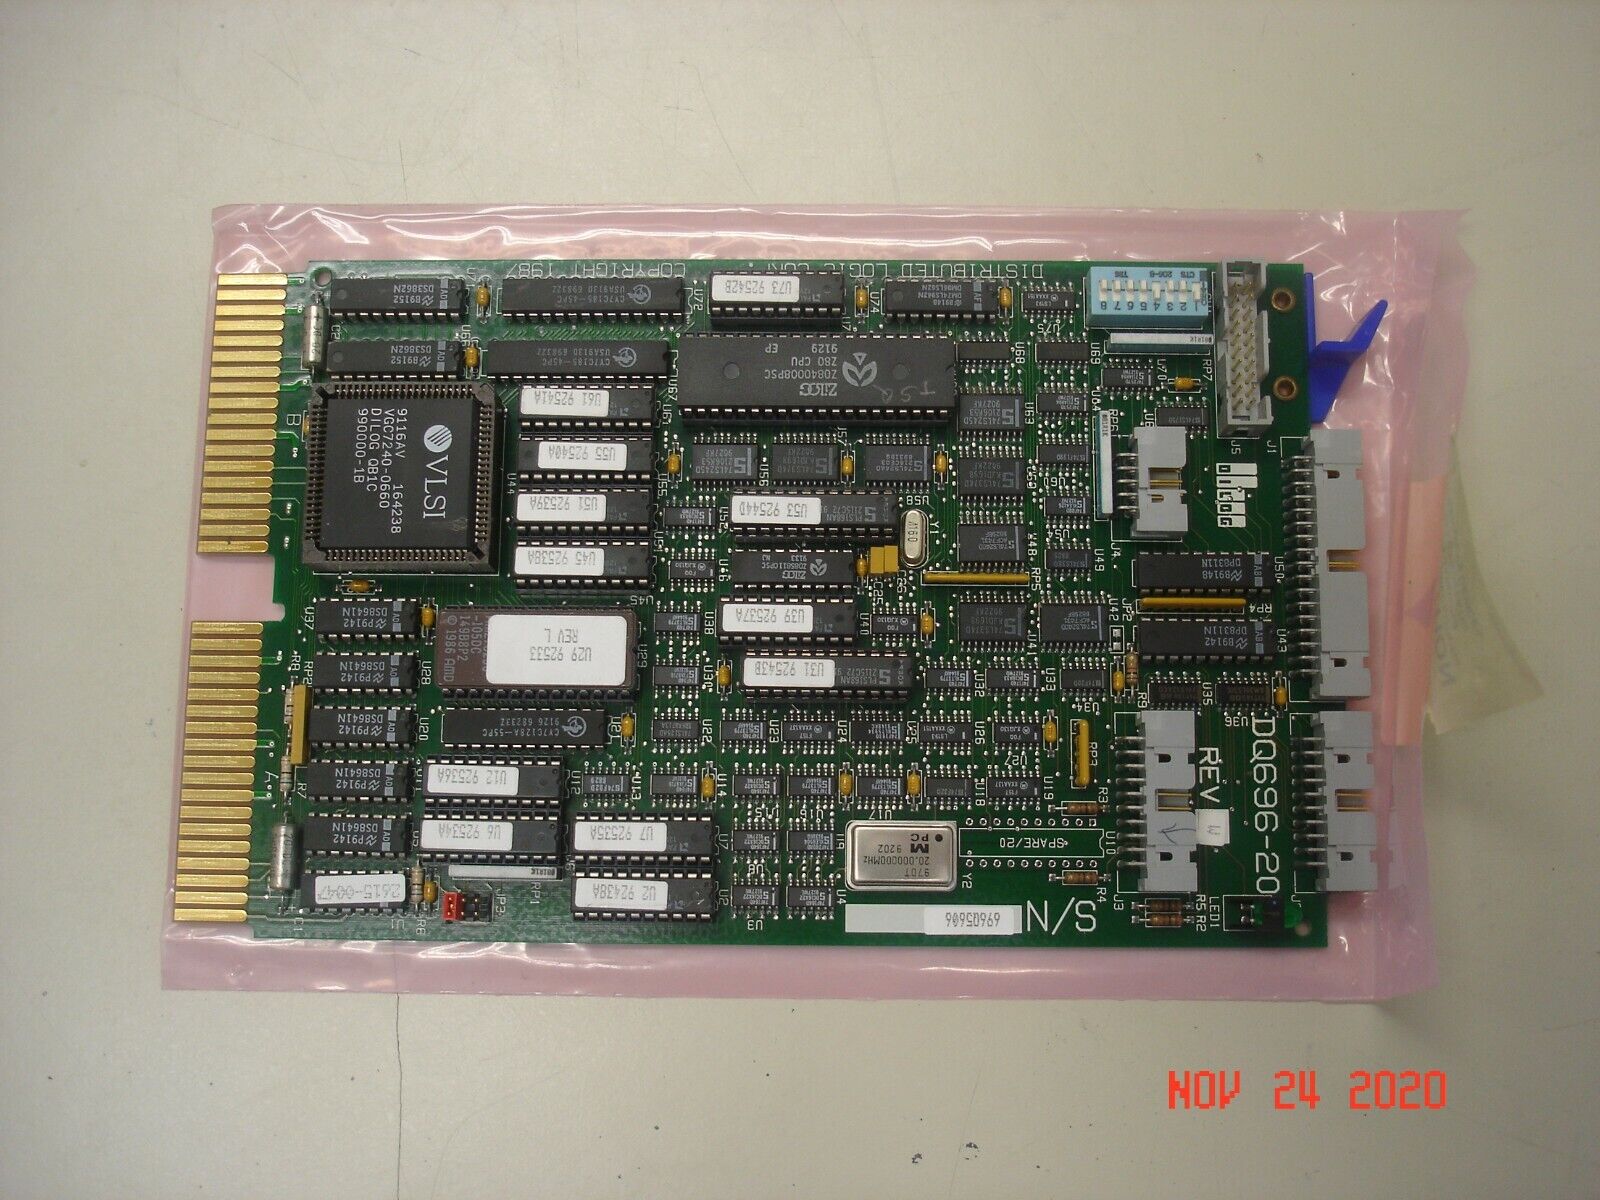 DILOG DQ696-20 20MHZ ESDI HDD CONTROLLER W/ I/O KIT FOR DEC QBUS LSI11 SYSTEMS